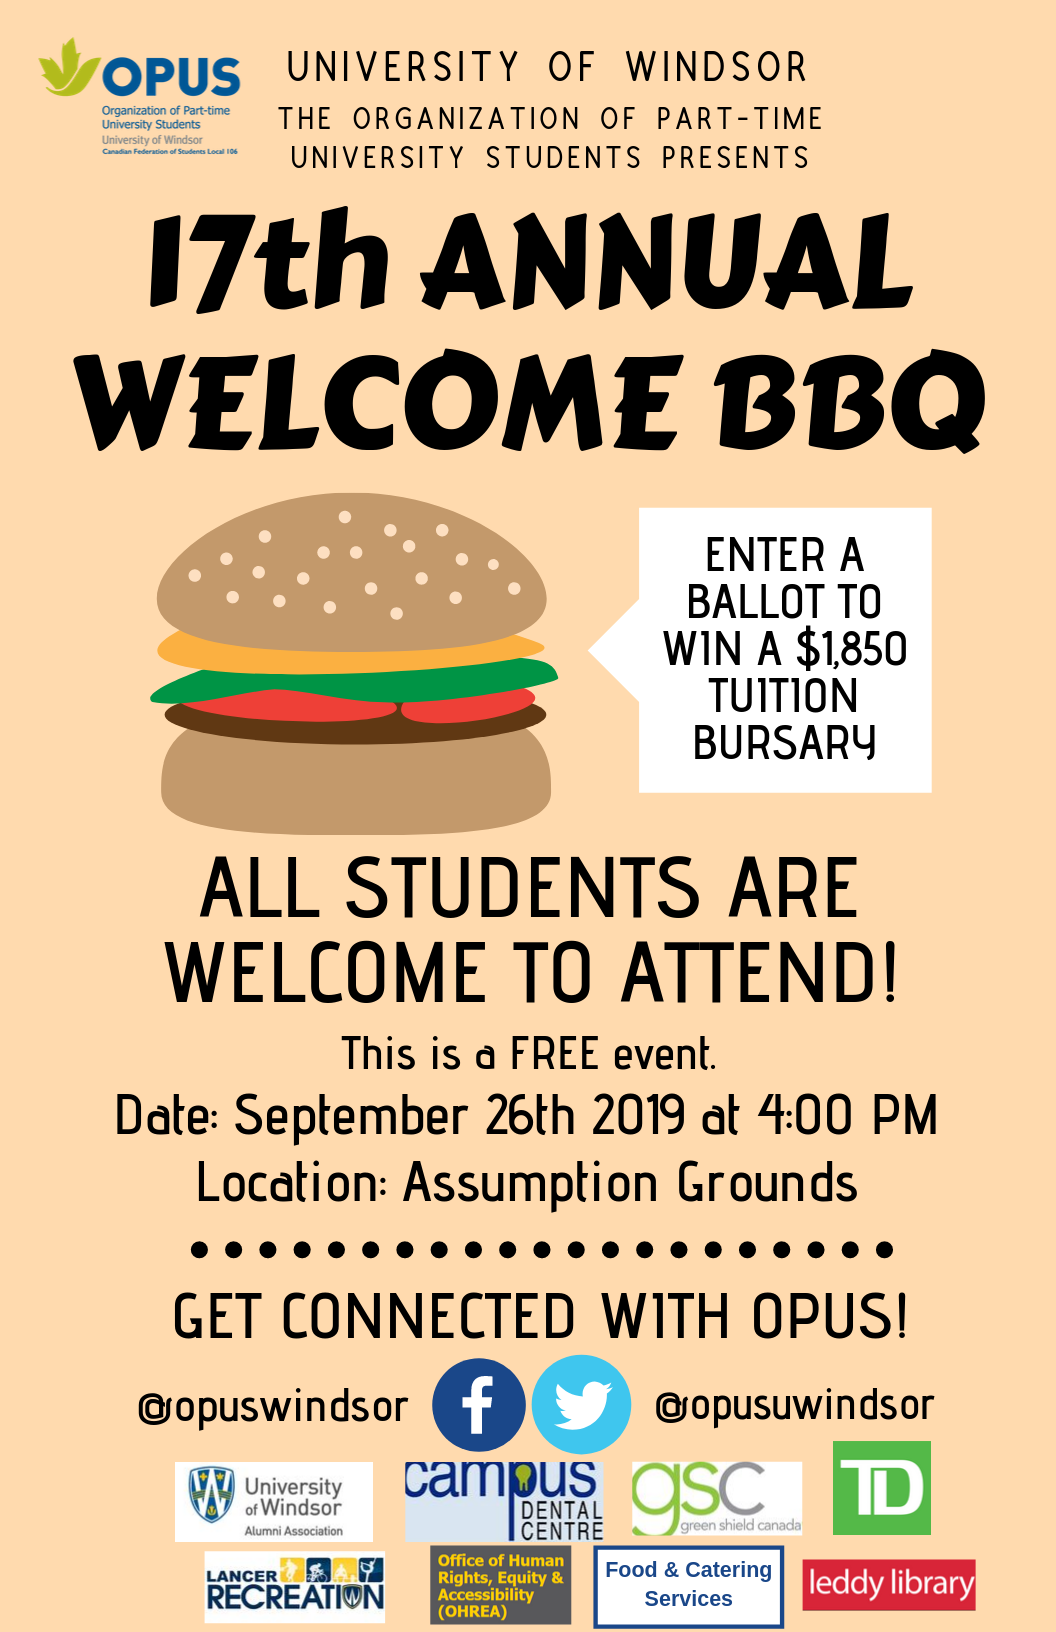 Annual Welcome BBQ | Organization of Part-time University Students